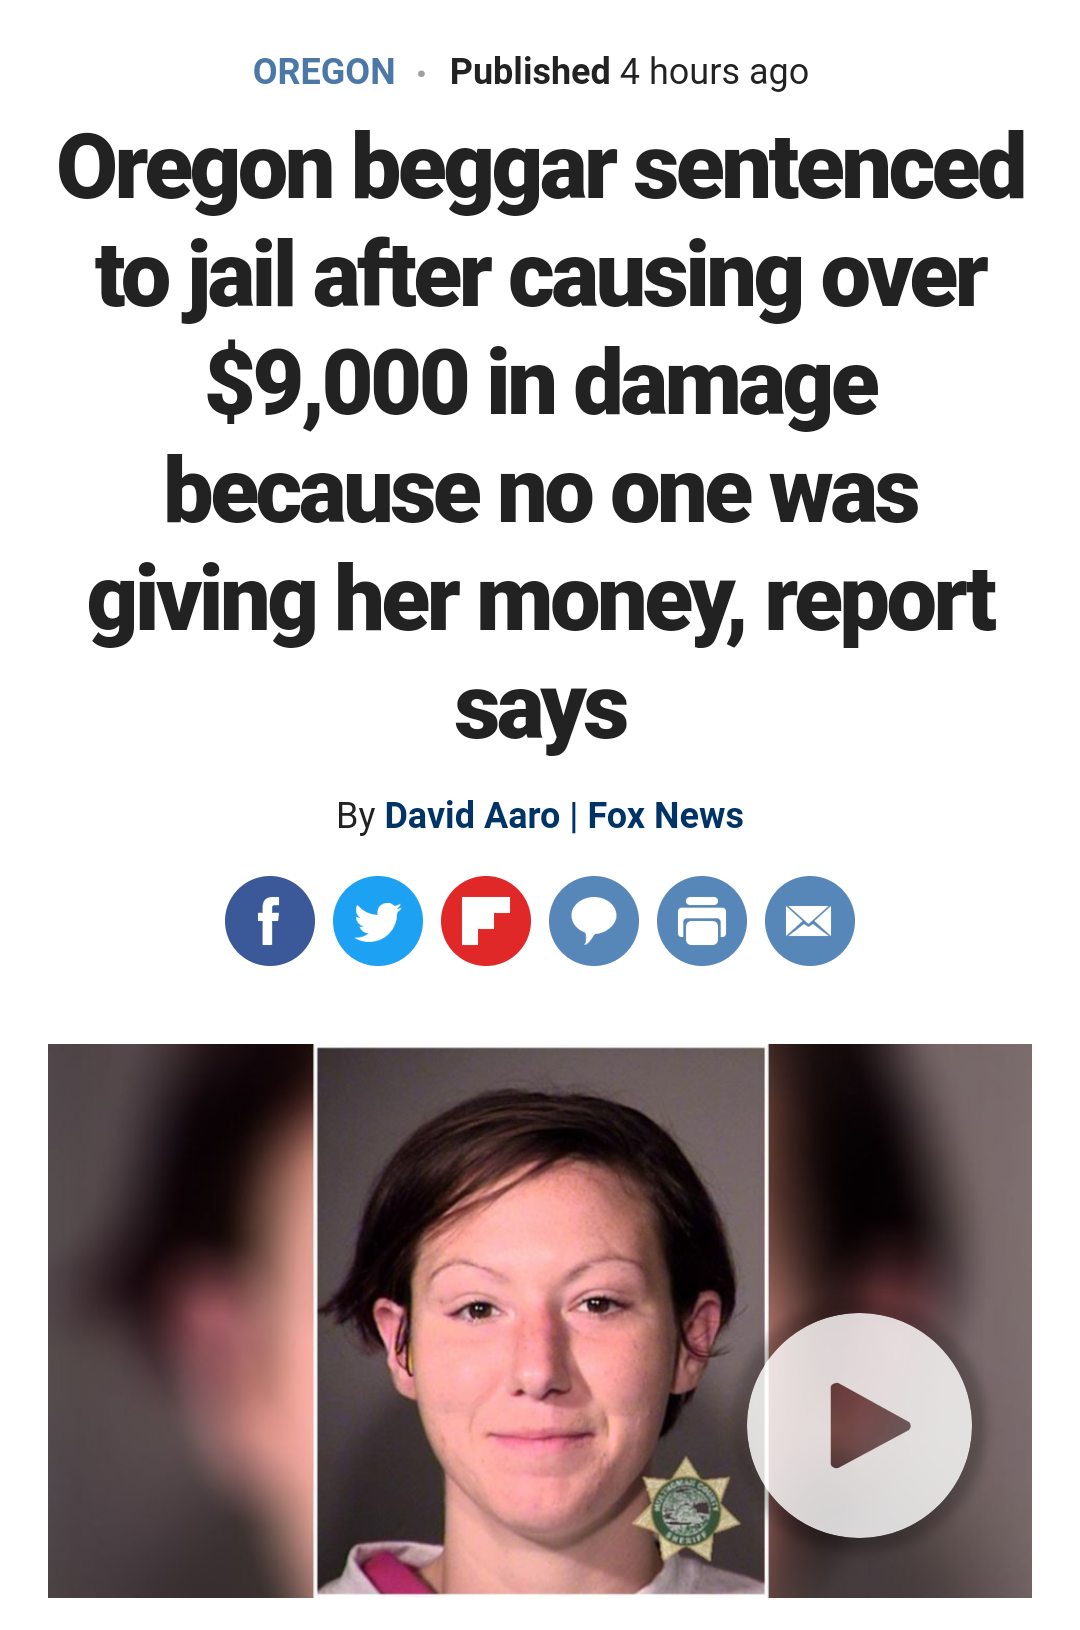 smile - Oregon Published 4 hours ago Oregon beggar sentenced to jail after causing over $9,000 in damage because no one was giving her money, report says By David Aaro Fox News 000000